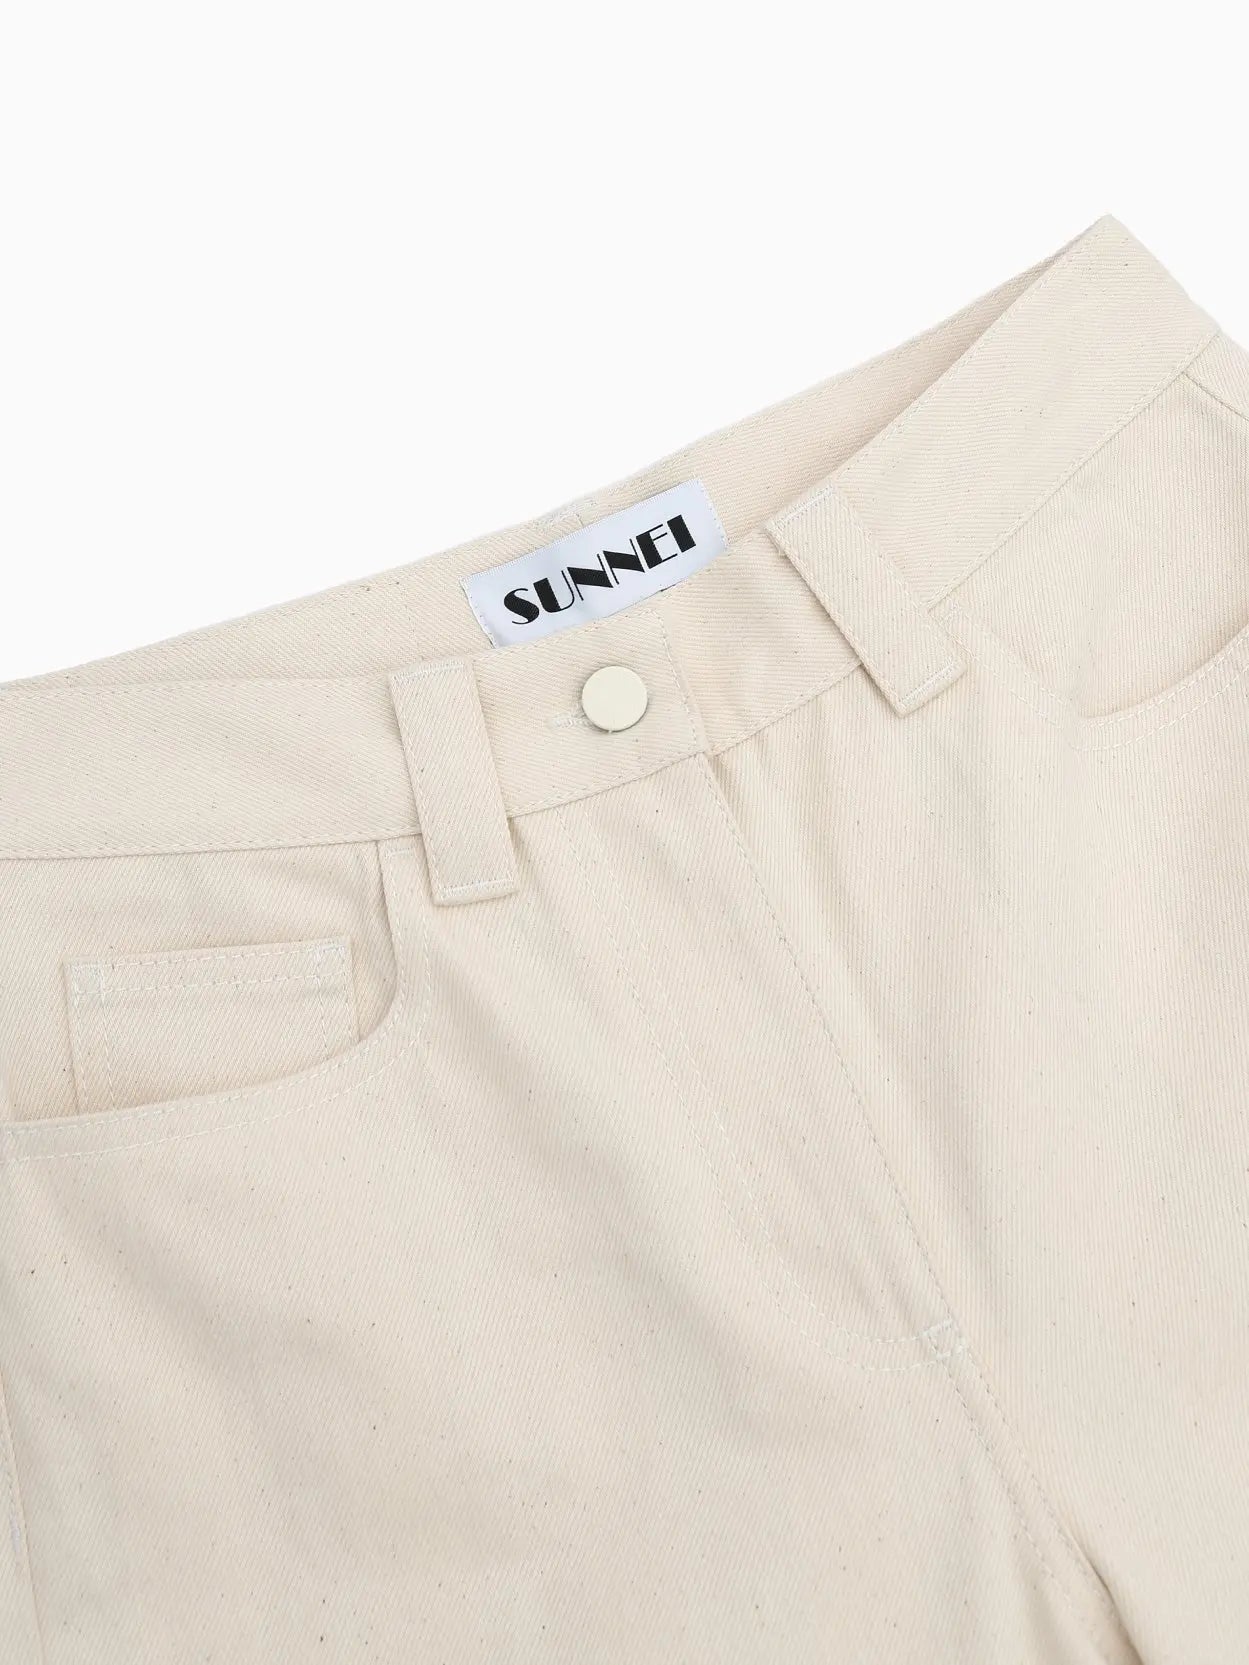 A pair of cream-colored straight-leg jeans with large, wide cuffs at the bottom. The cuffs feature vertical beige and white stripes. The Classic Denim Pants White Stripes by Sunnei, available at Bassalstore in Barcelona, have a classic five-pocket design with a button and zipper closure against a plain white background.